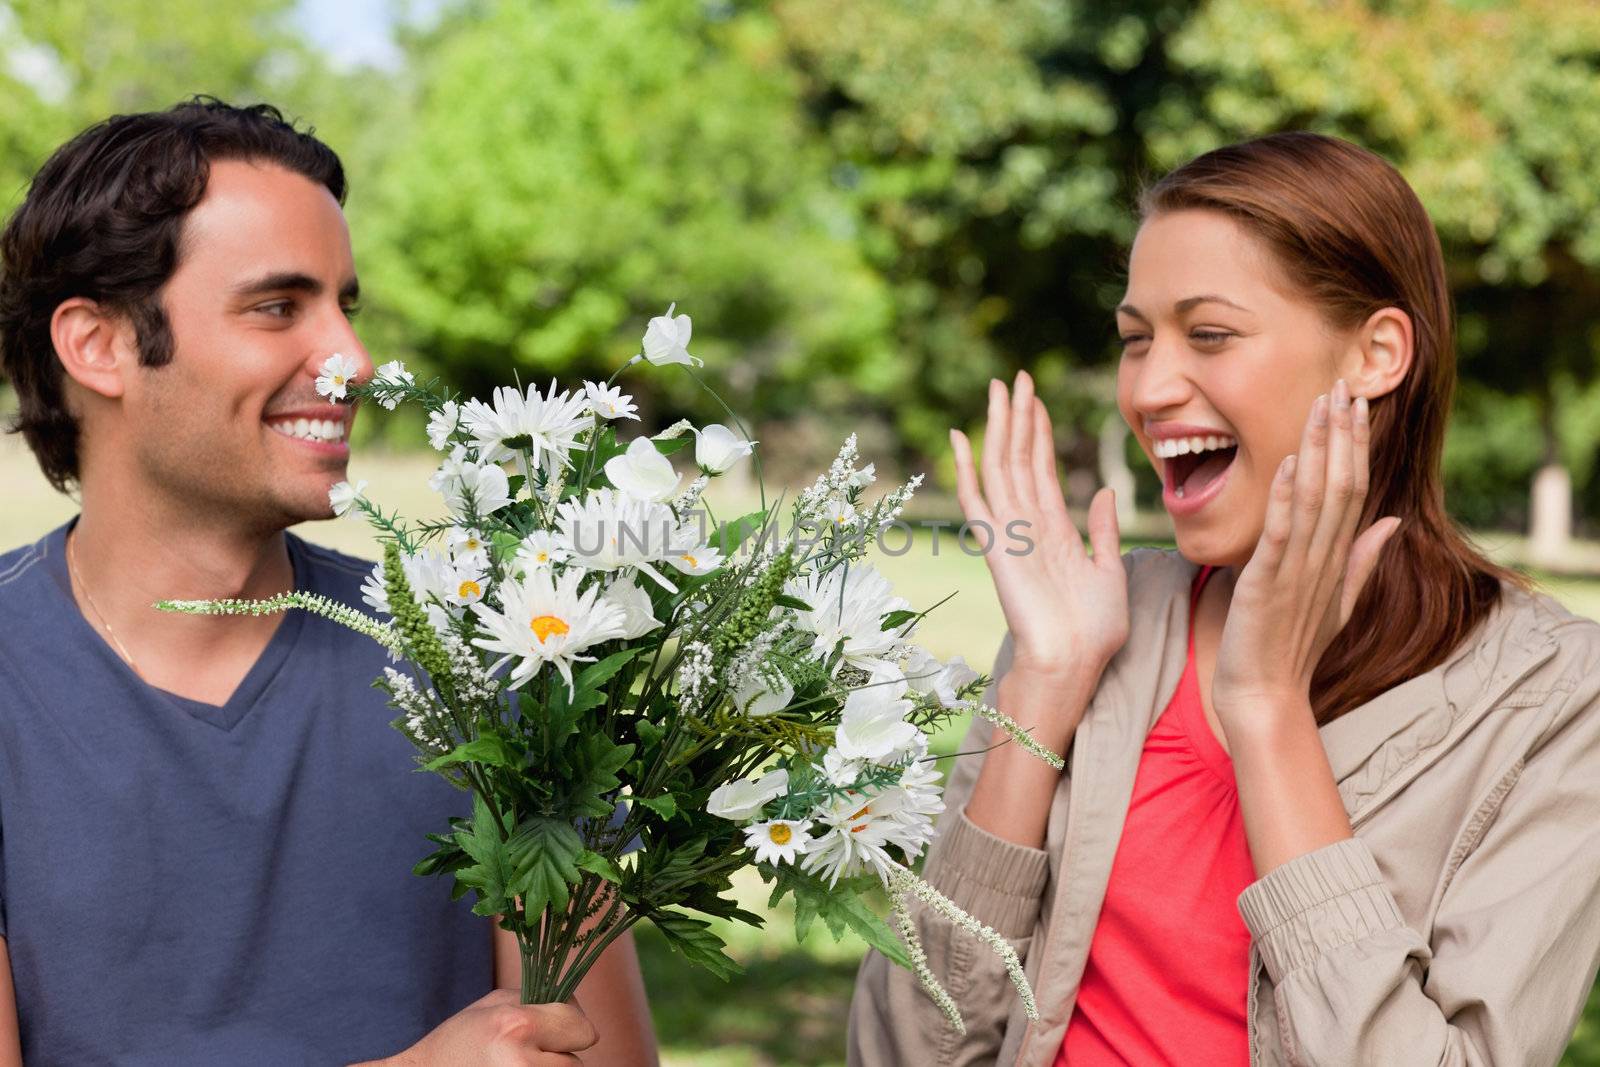 Woman laughing excitedly as she is presented with a bunch of flowers by her friend in a sunny parkland